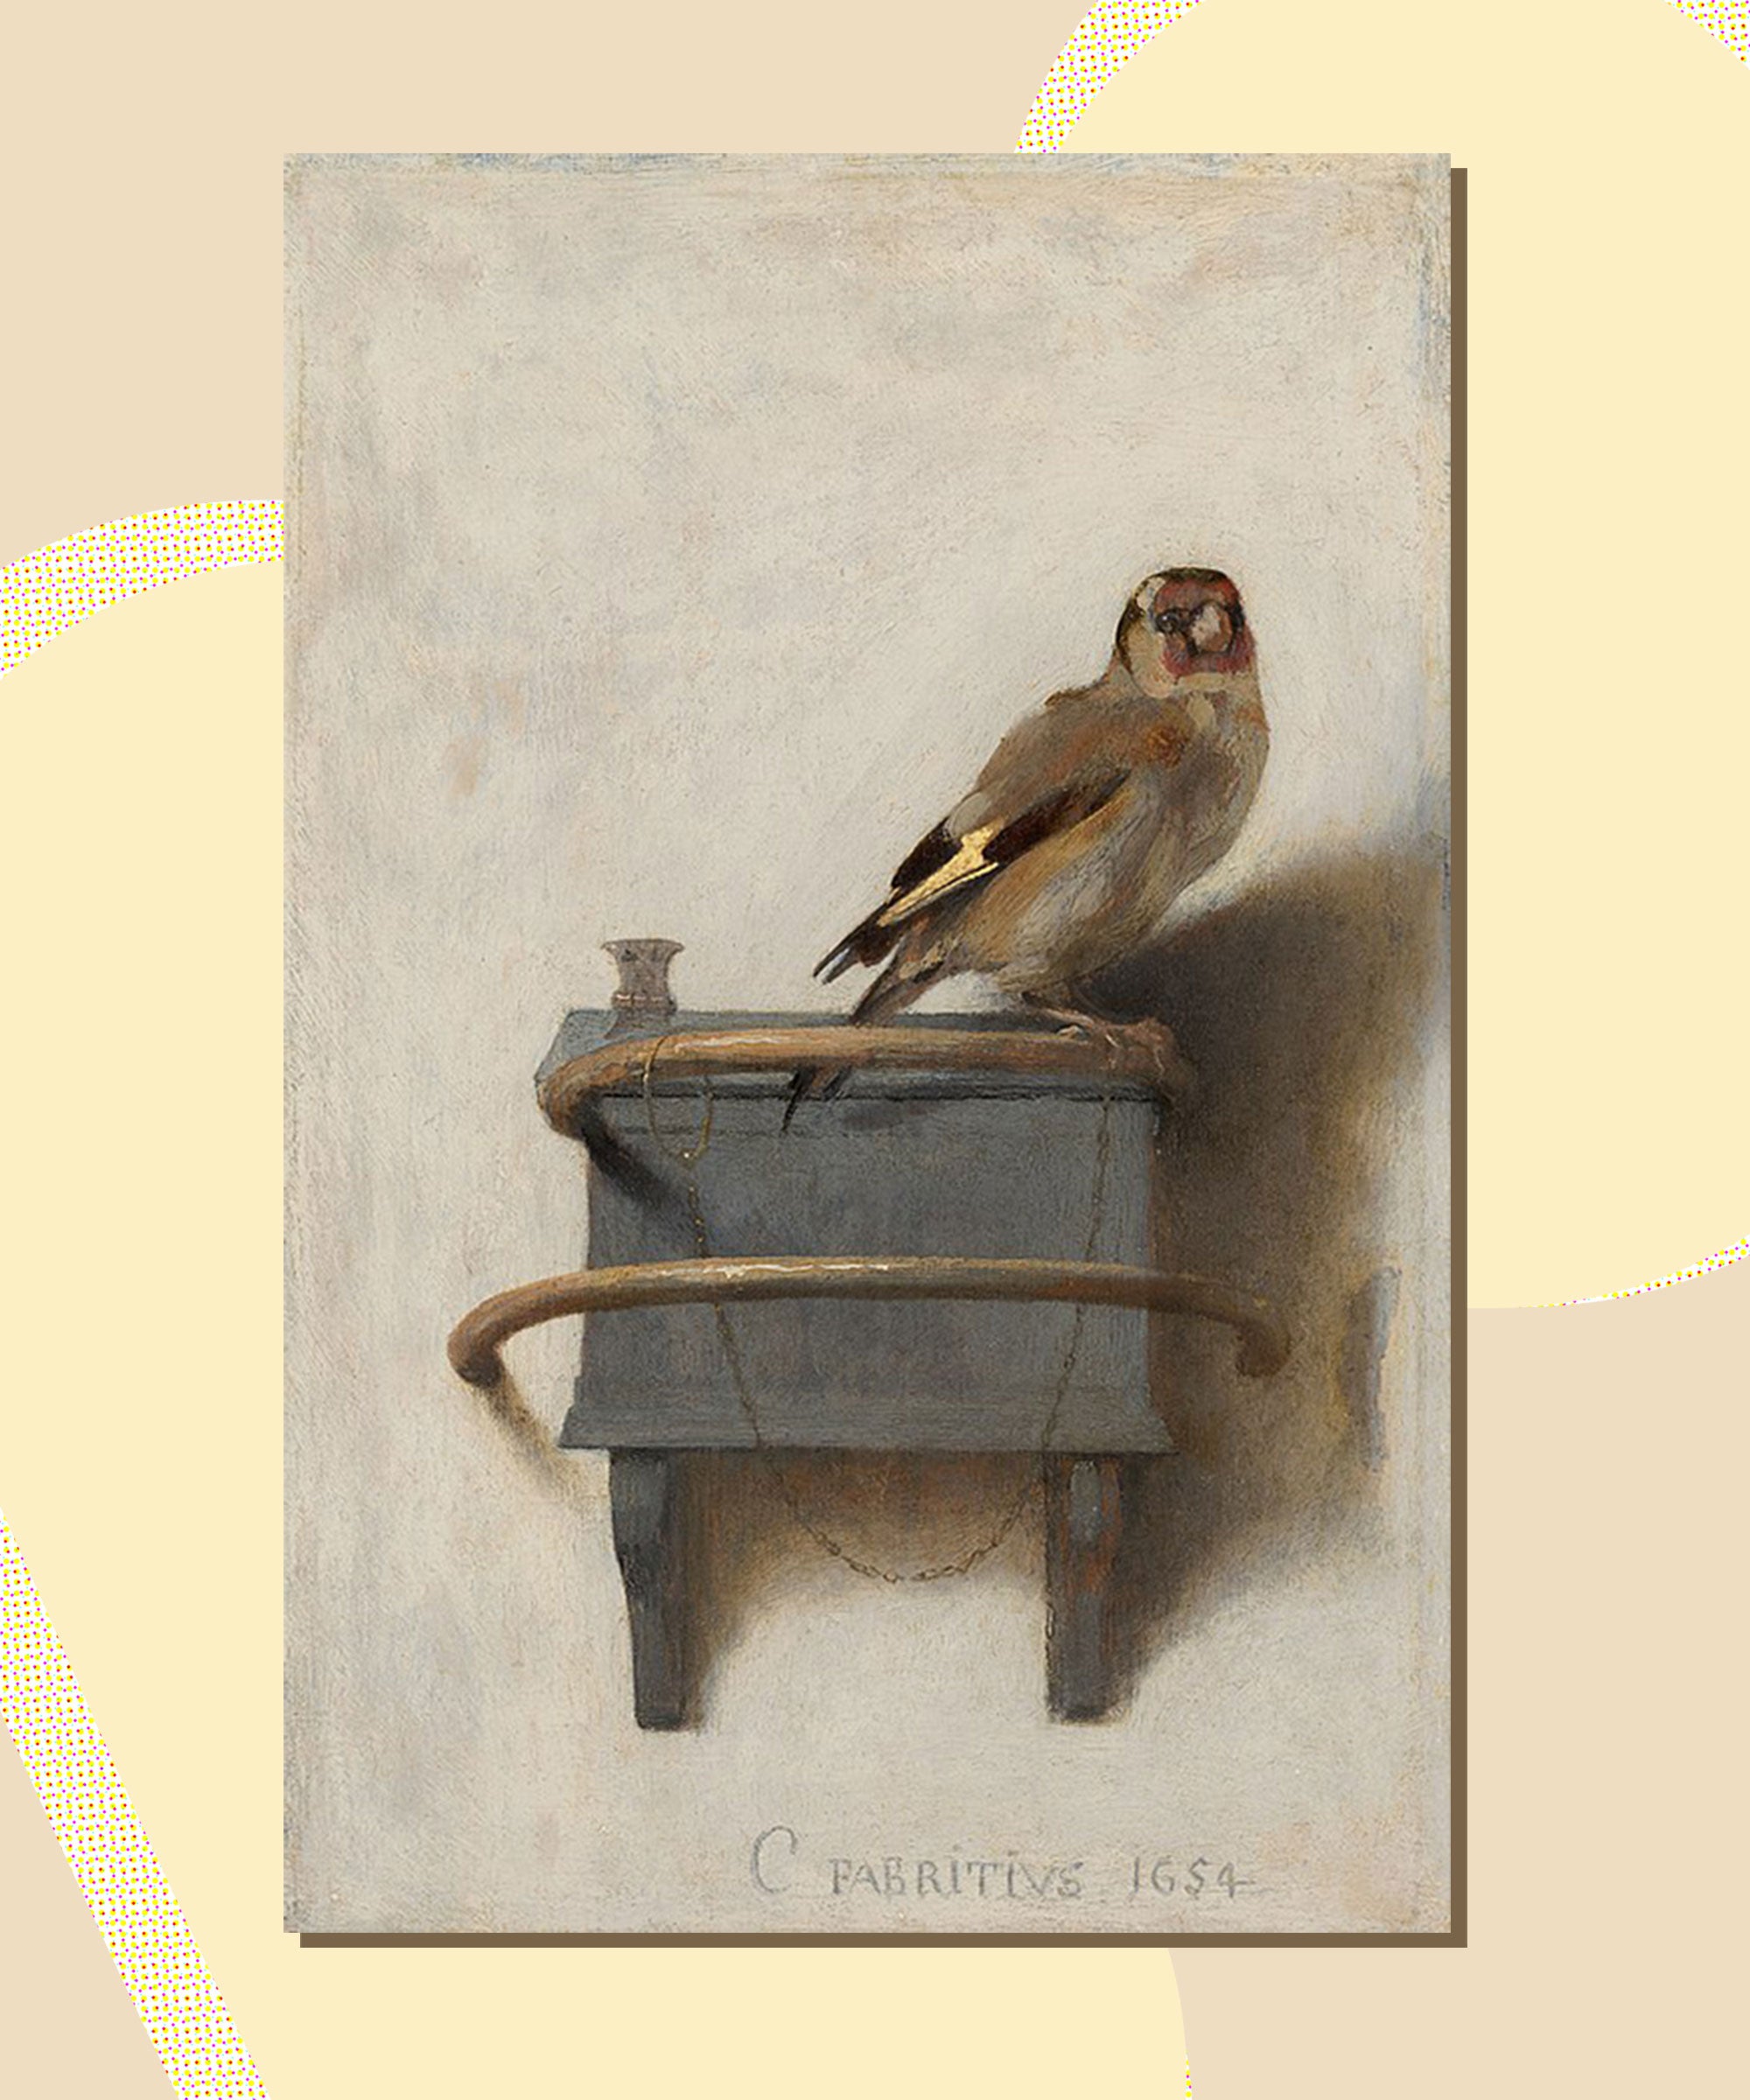 The Real Goldfinch Painting Has A Crazy Story Behind It